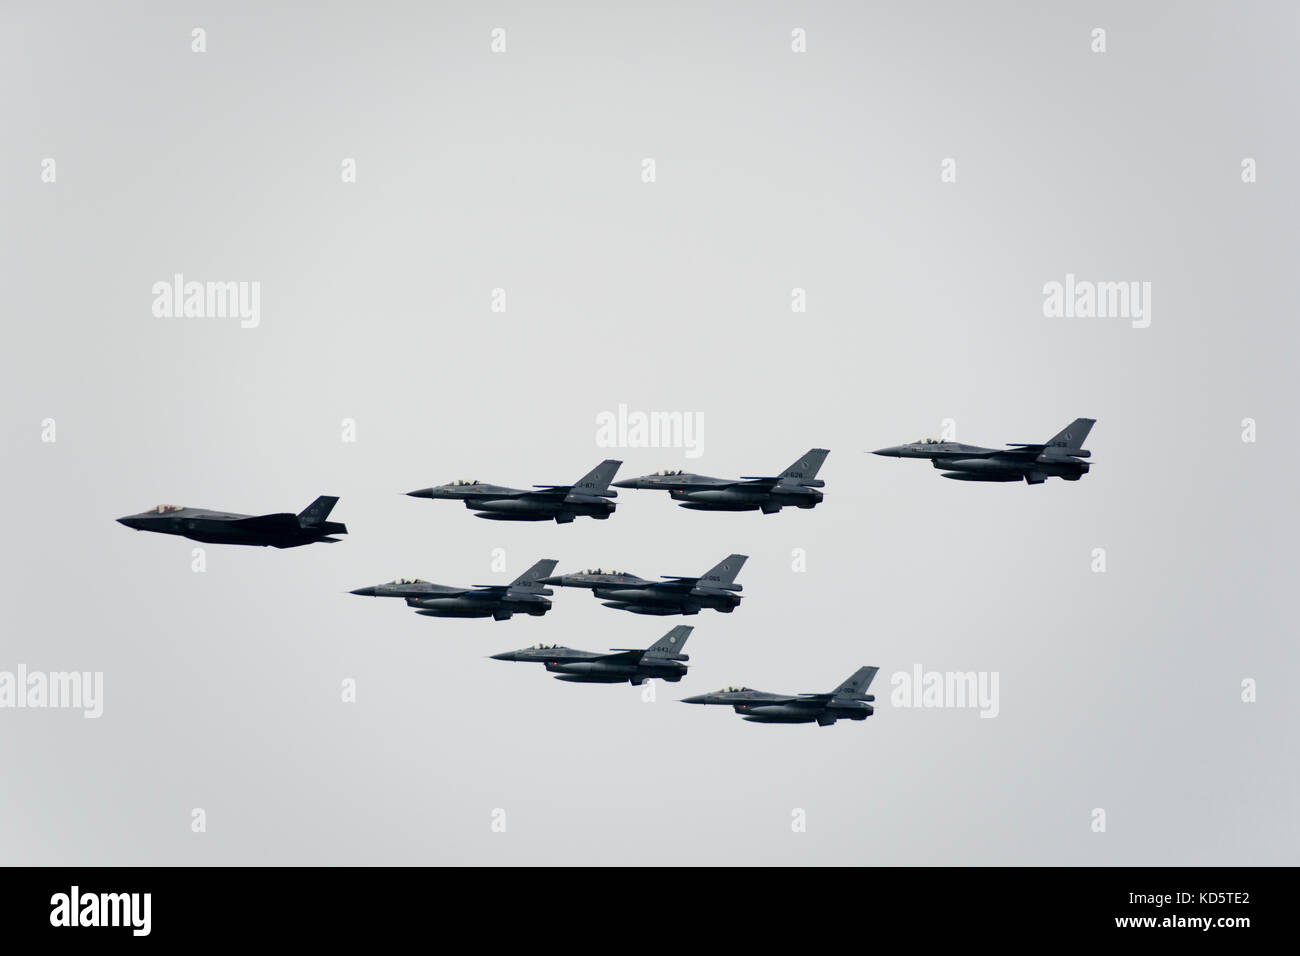 One F-35 and seven F-16 fighter jets in formation at the air show of the Royal Netherlands Air Force at the military air base in Leeuwarden, Netherlan Stock Photo